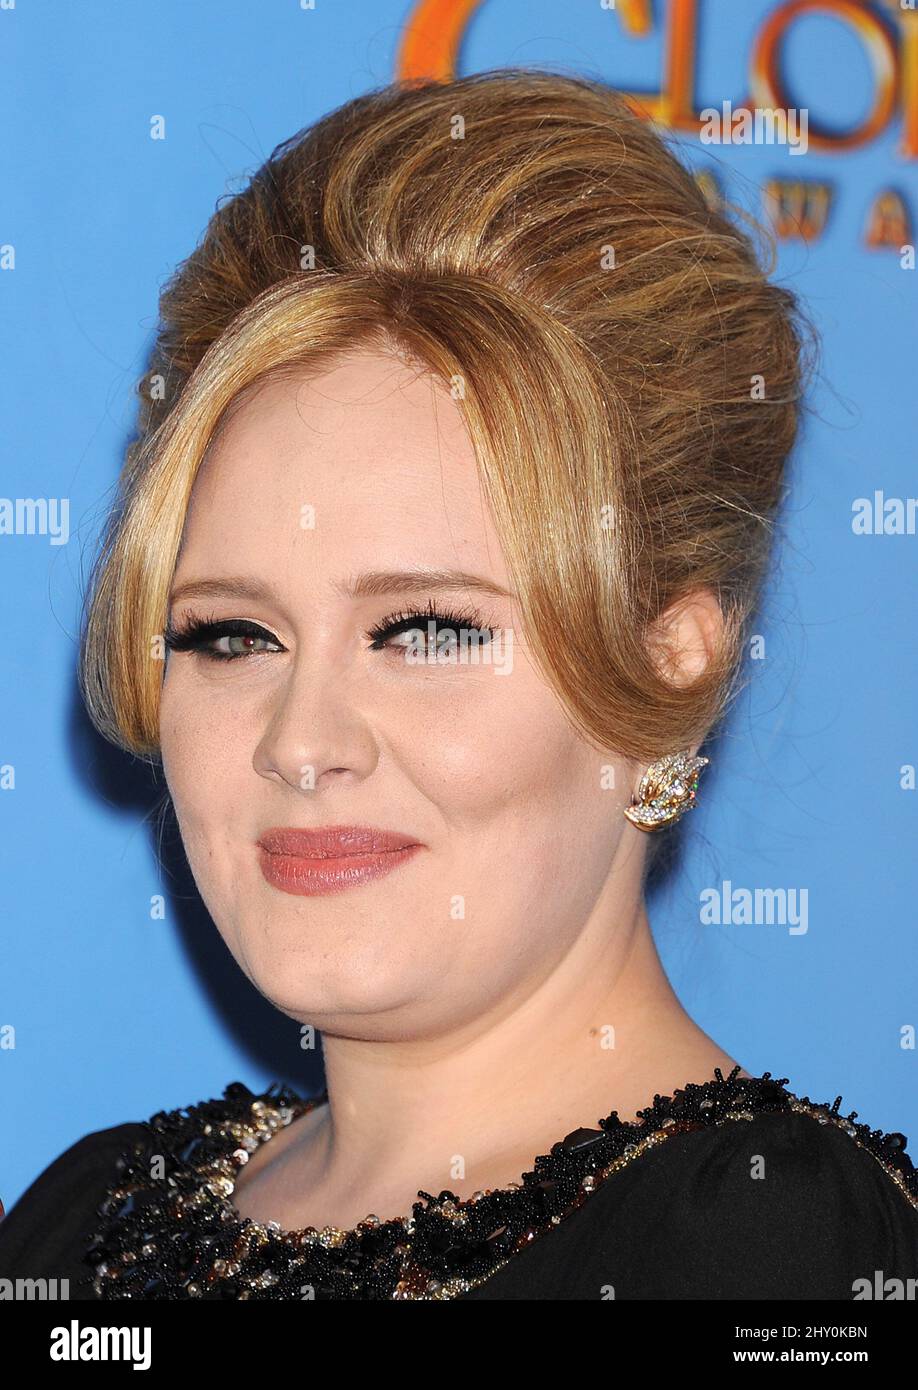 Adele in the press room at the 70th Annual Golden Globe Awards held at the Beverly Hilton Hotel in Los Angeles, USA. Stock Photo